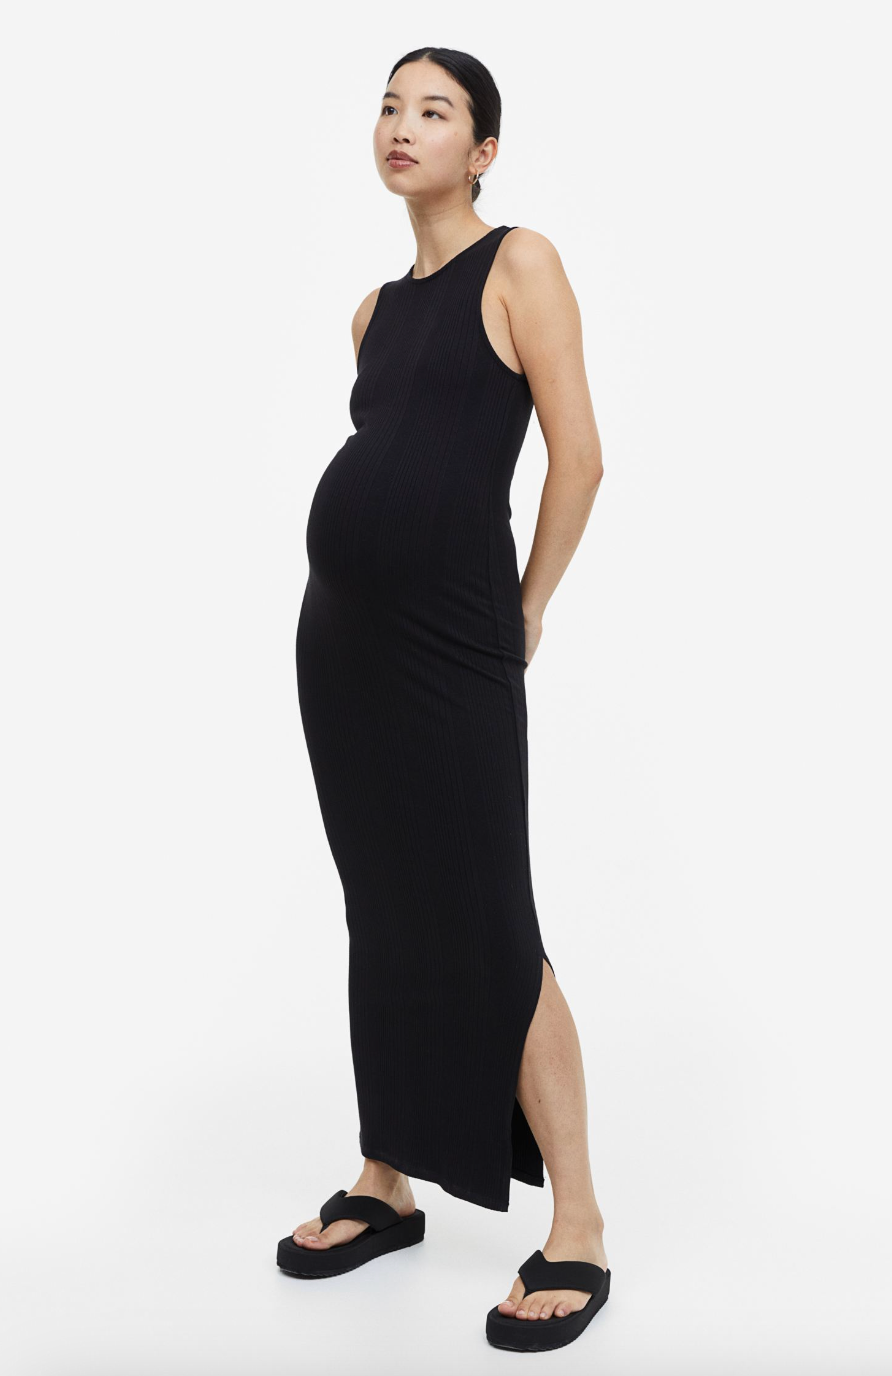 Cheap Maternity Clothes, Cheap Maternity Dresses